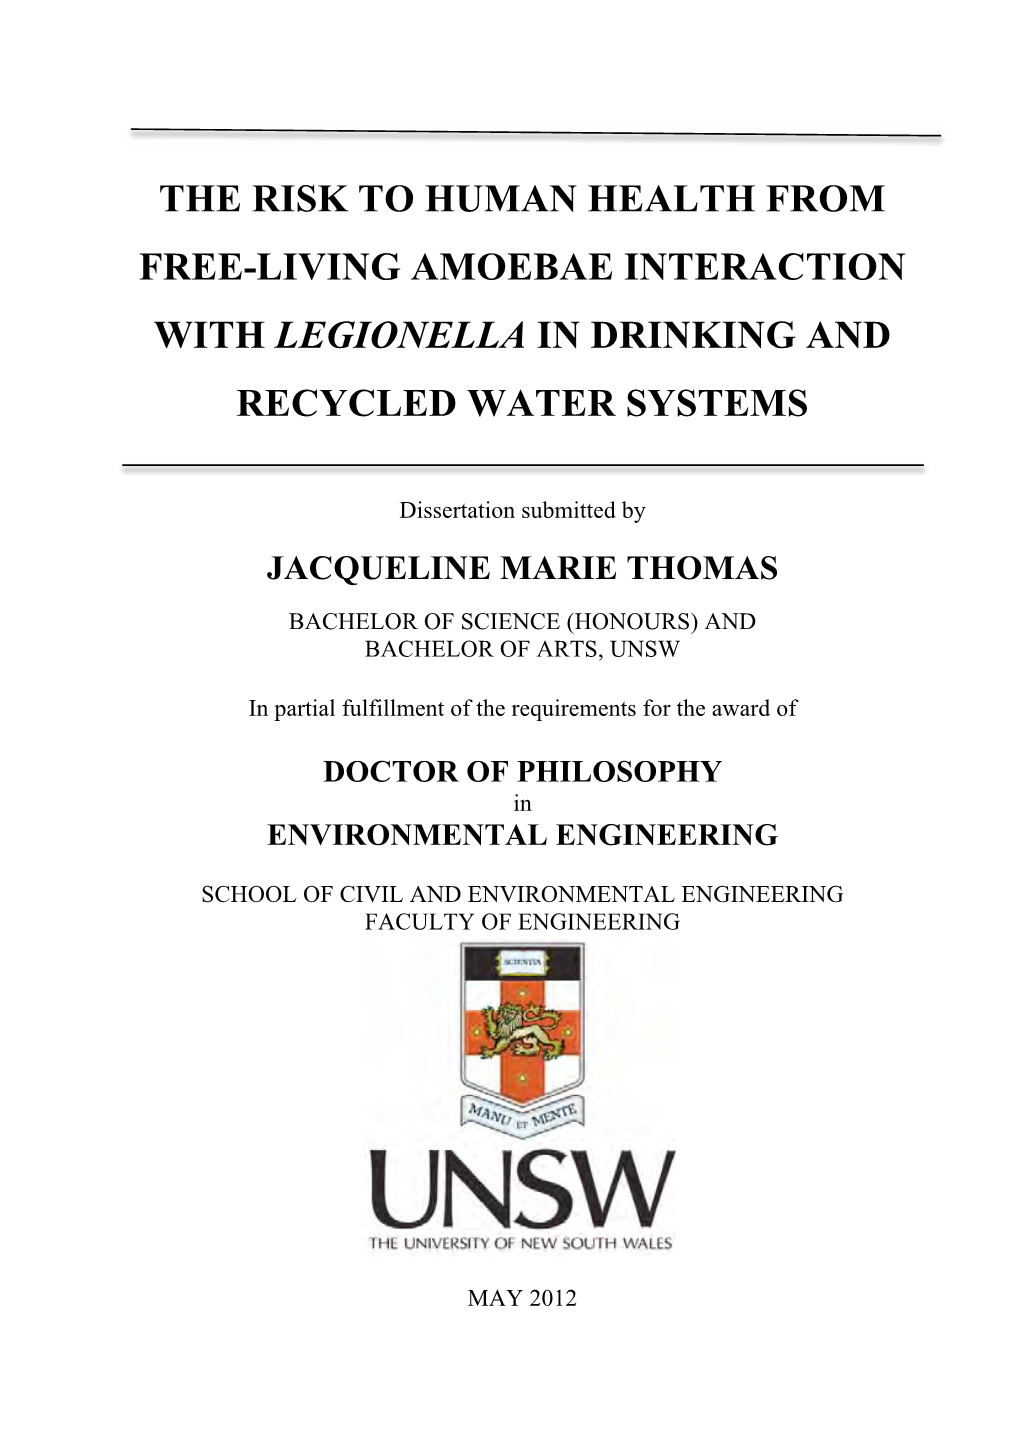 The Risk to Human Health from Free-Living Amoebae Interaction with Legionella in Drinking and Recycled Water Systems